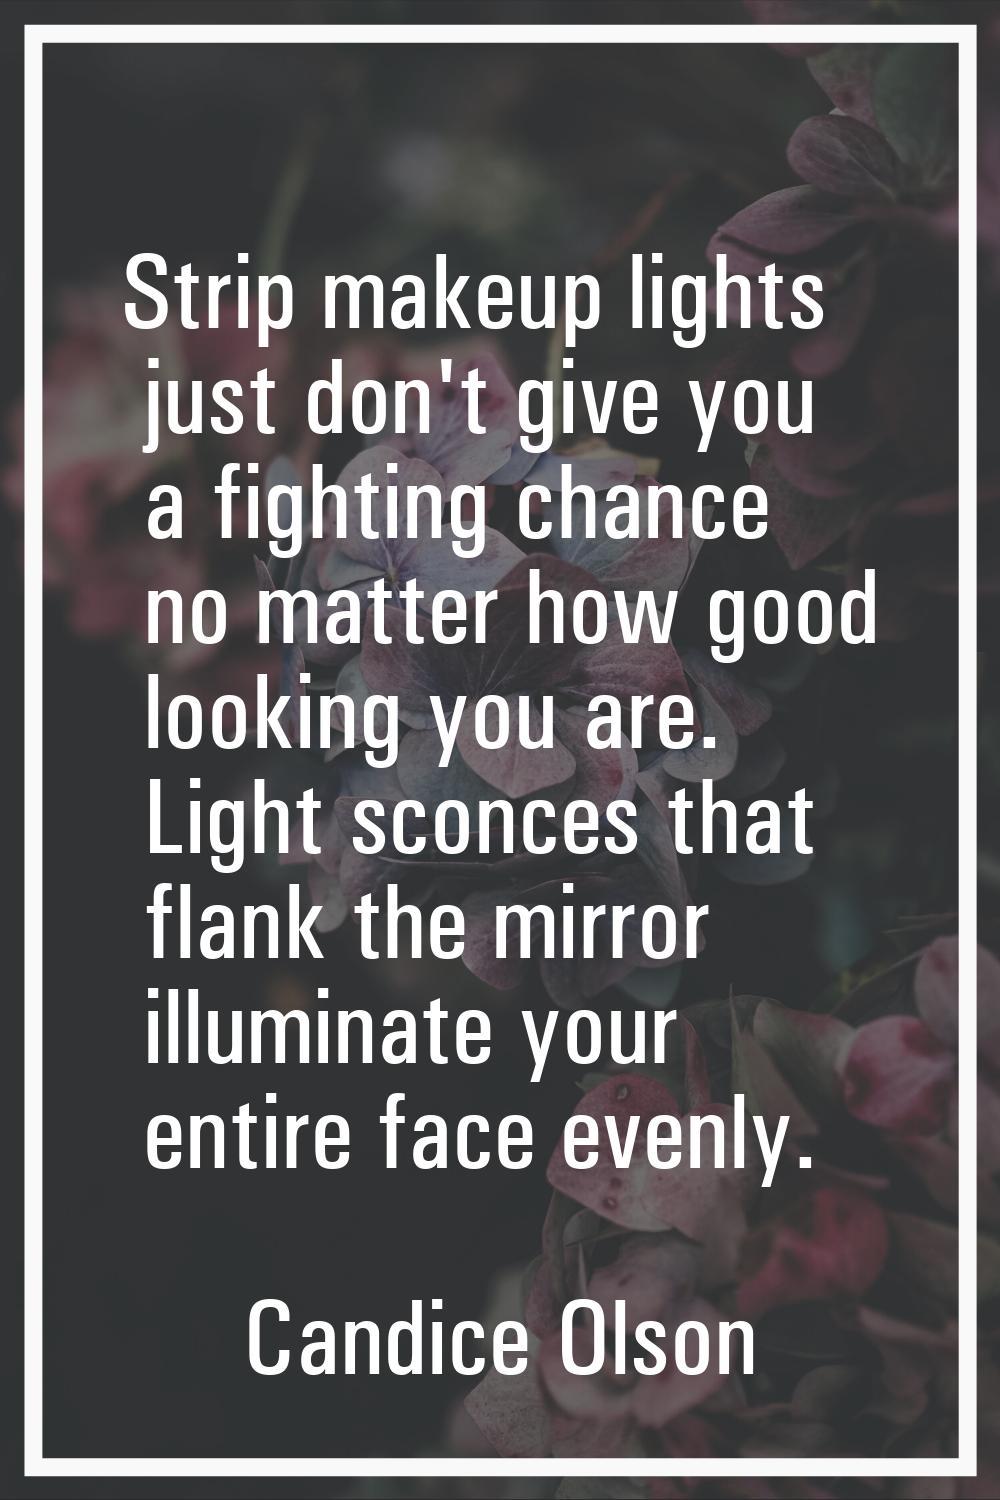 Strip makeup lights just don't give you a fighting chance no matter how good looking you are. Light